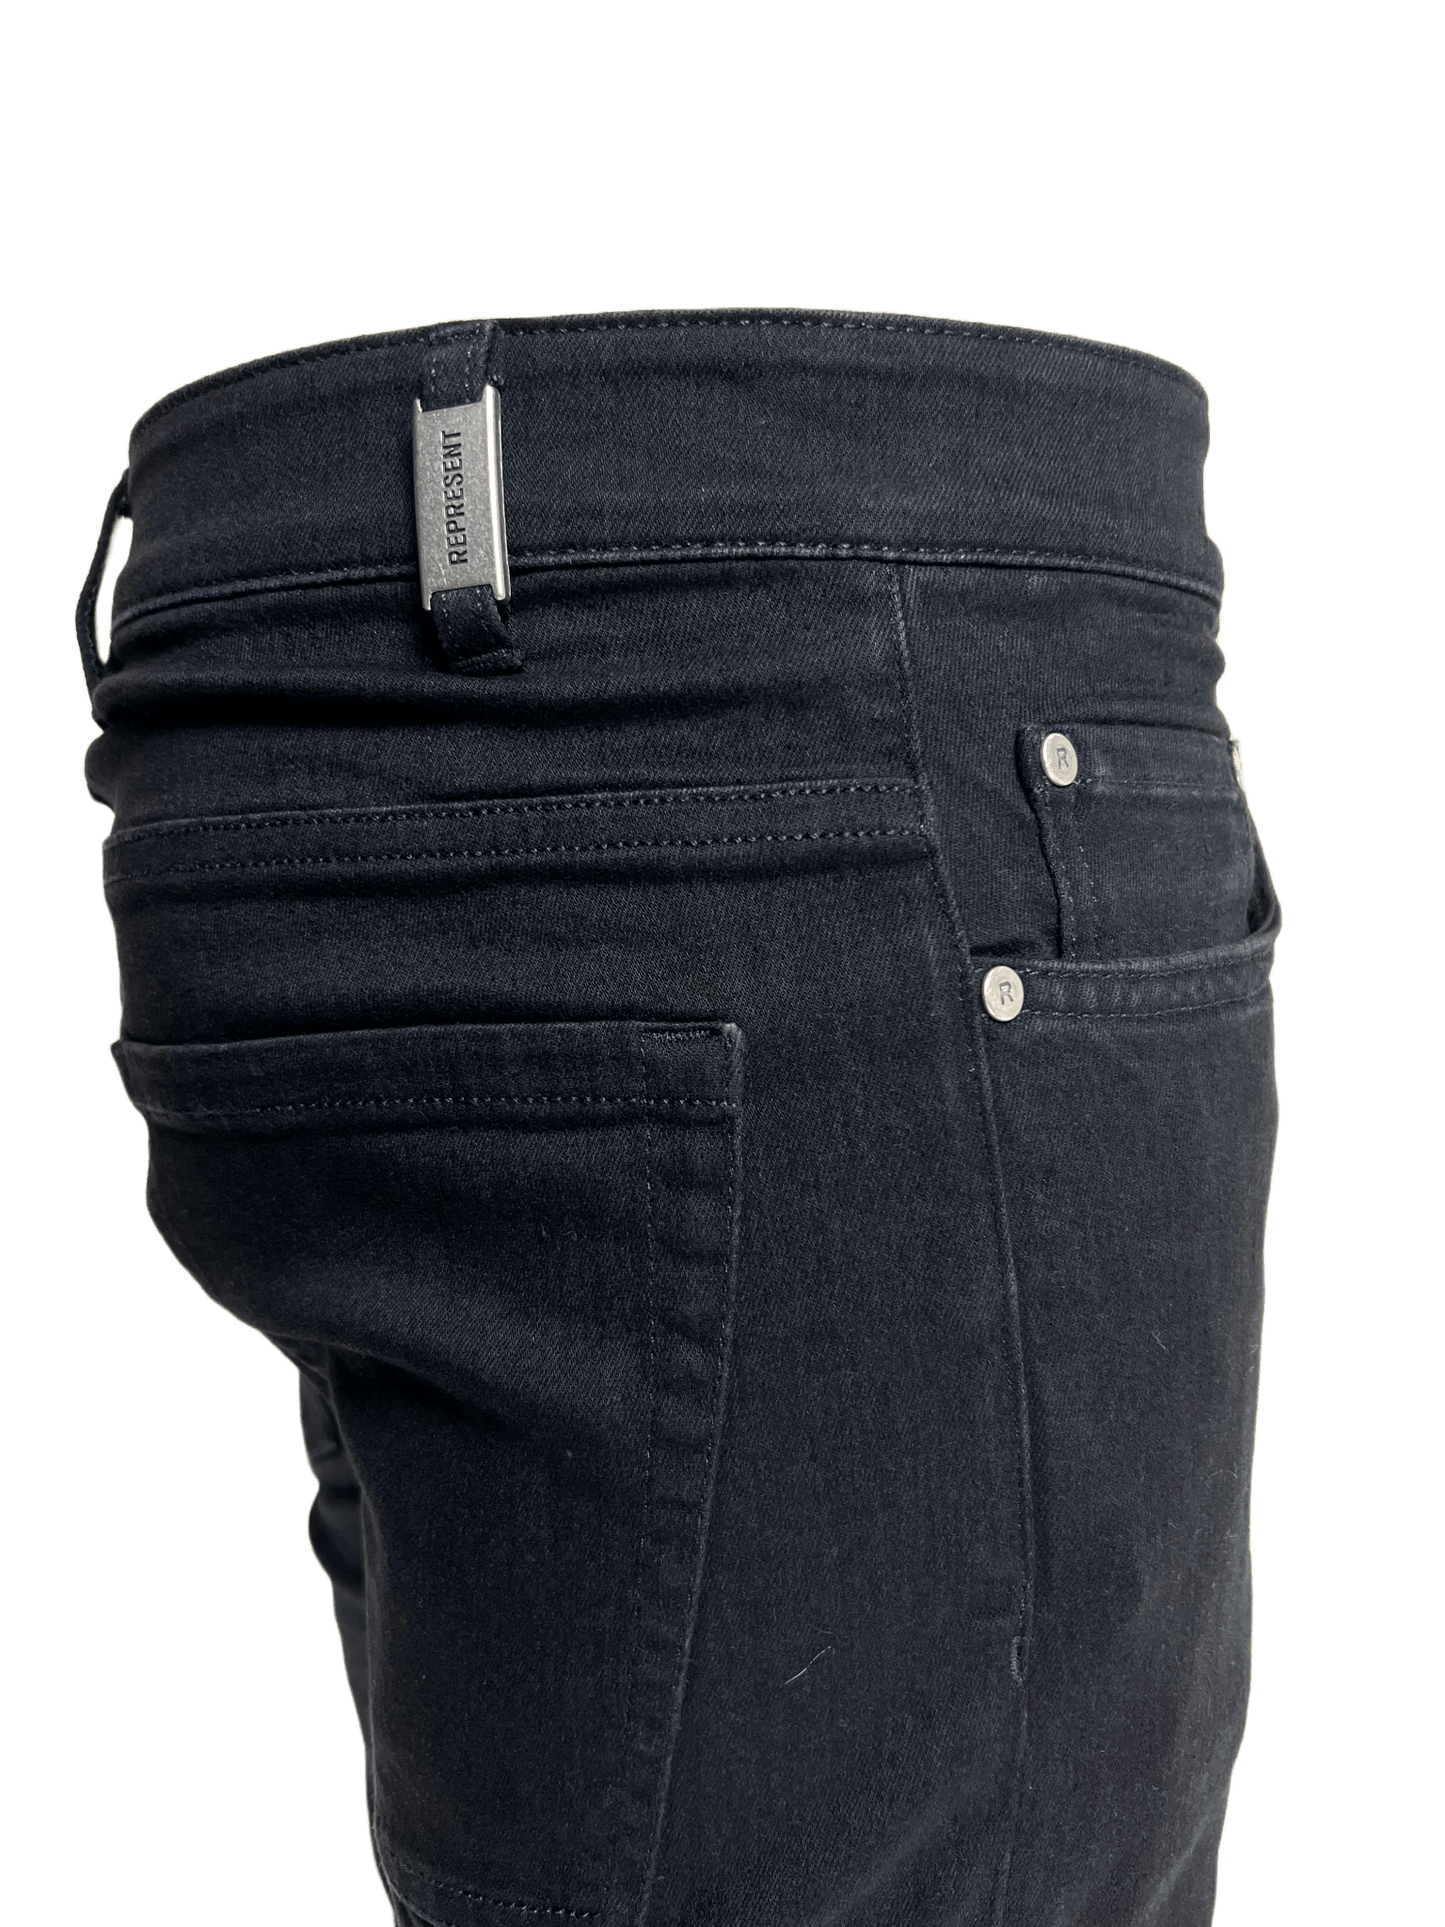 The back pocket of a pair of distressed REPRESENT M07044 DESTROYER DENIM BLACK jeans.